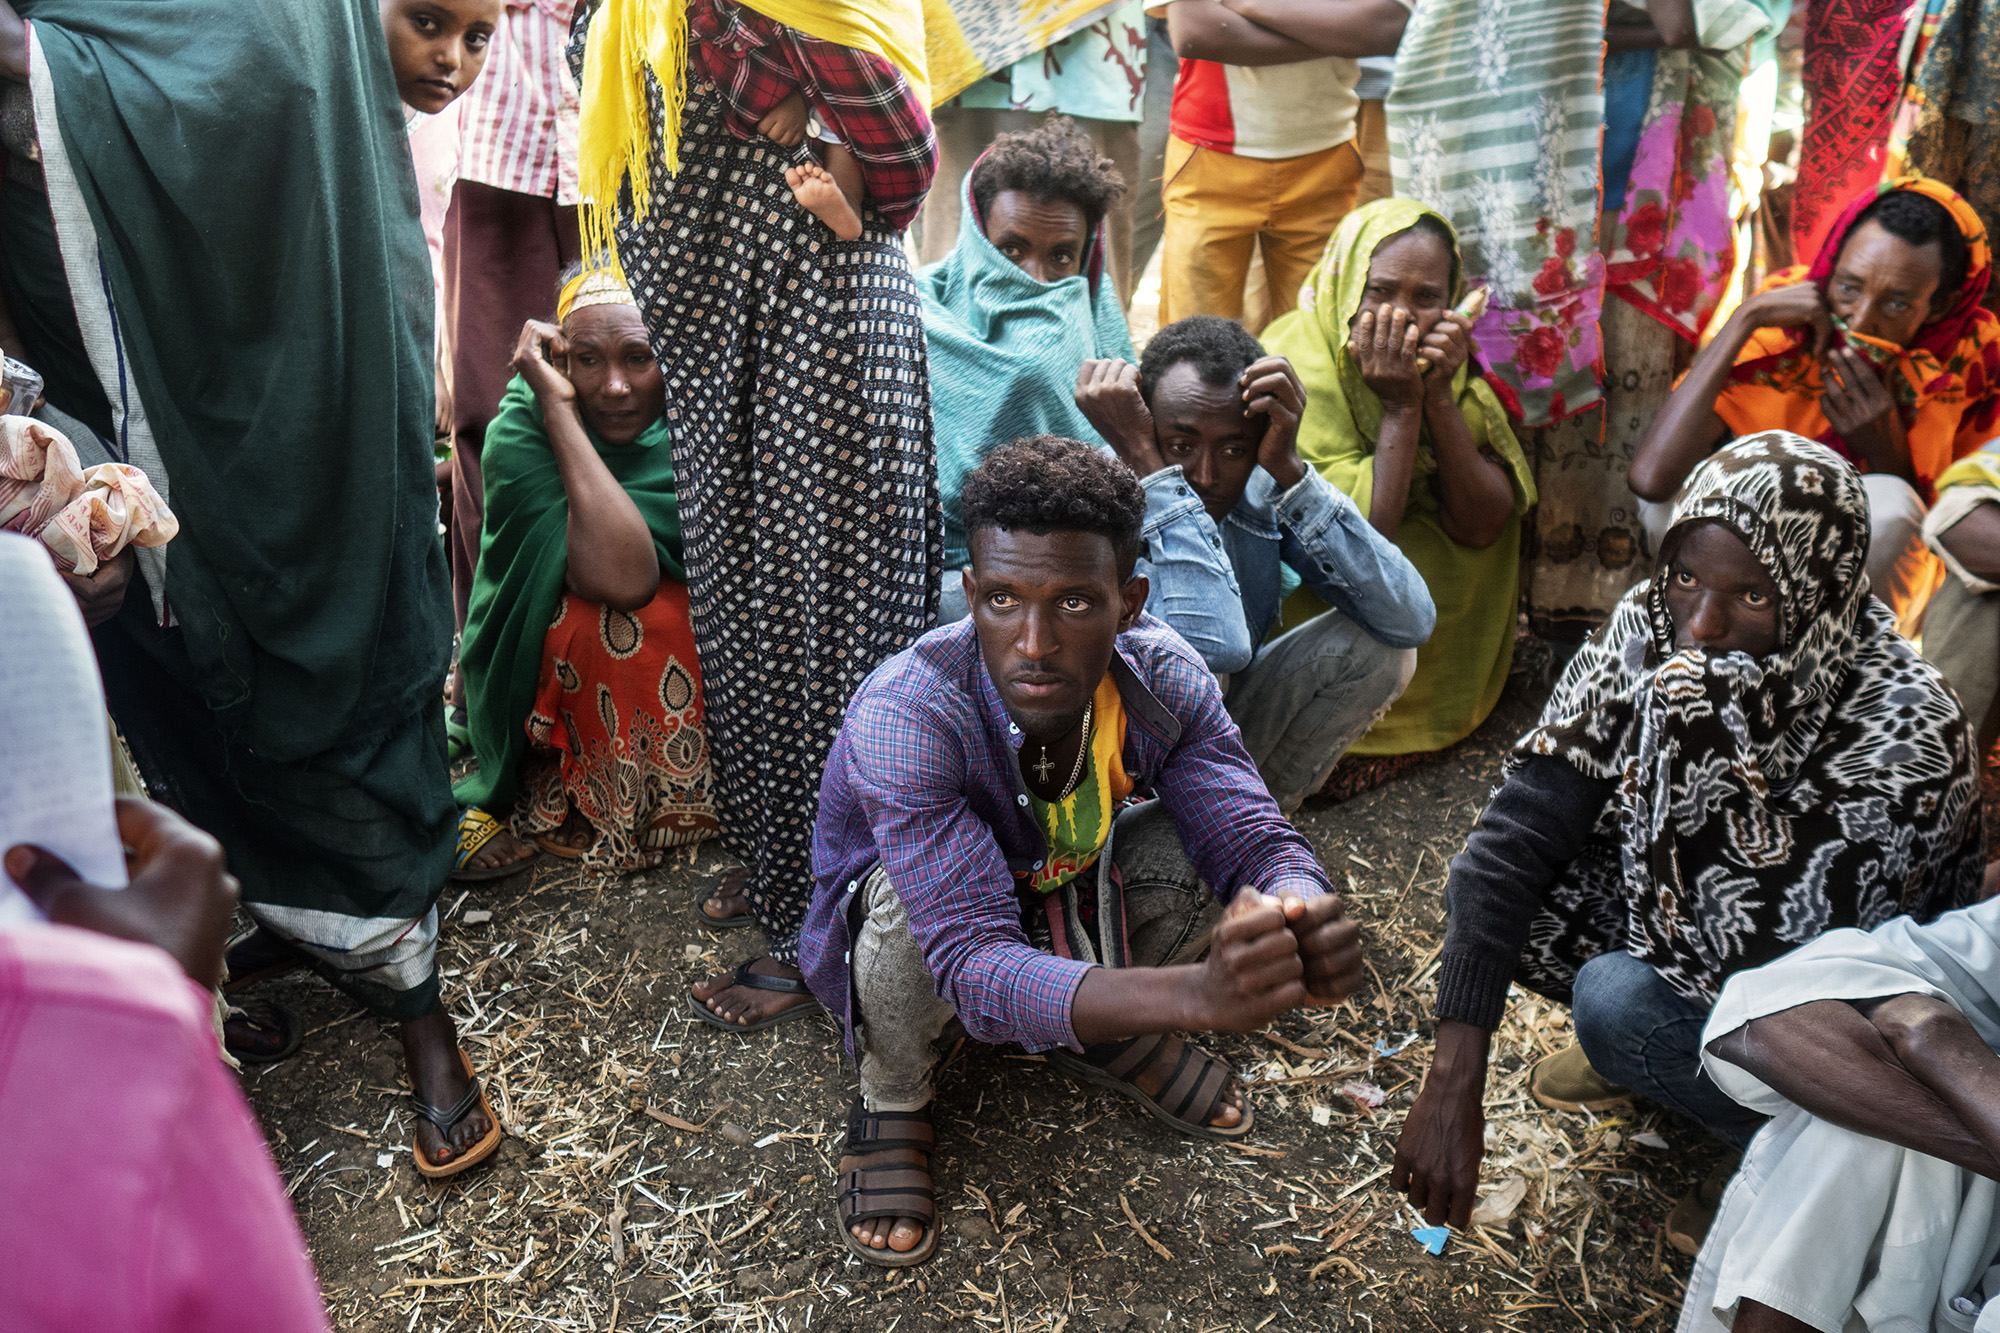 Refugees from the Tigray region of Ethiopia wait at Al-Shabat transit camp. Sudan 2020 